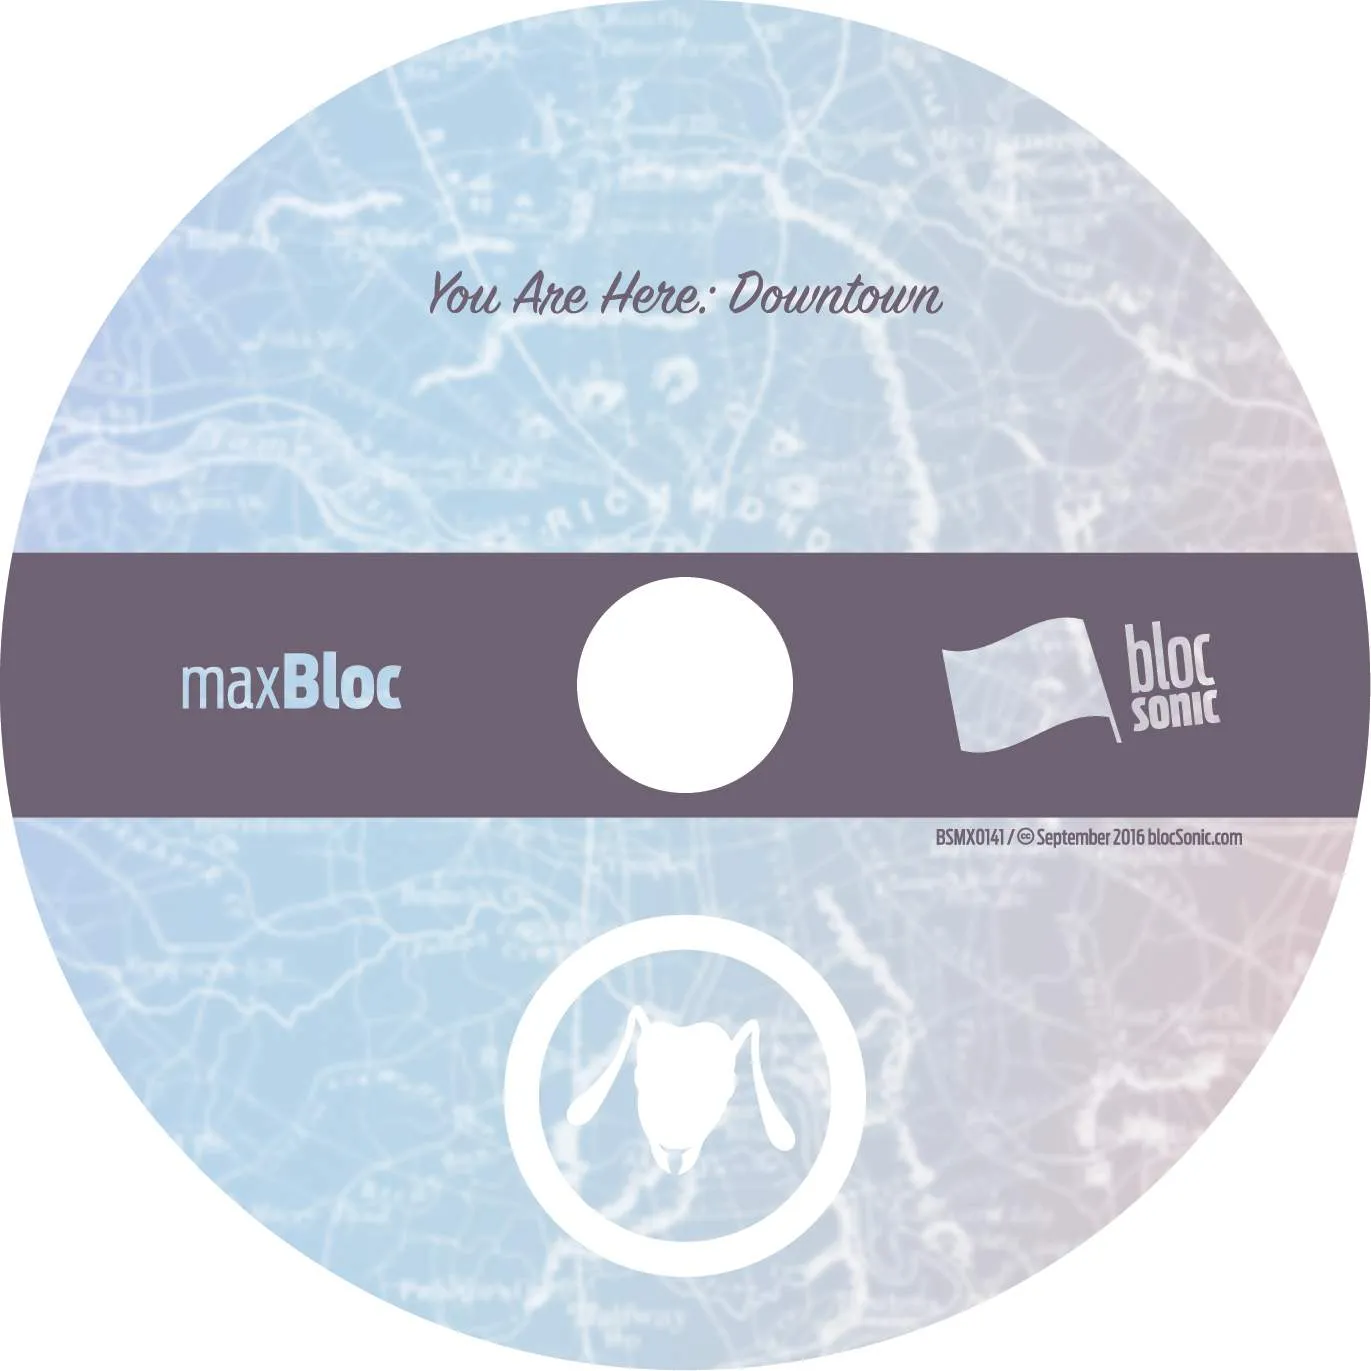 Album disc for “You Are Here: Downtown” by Ant The Symbol